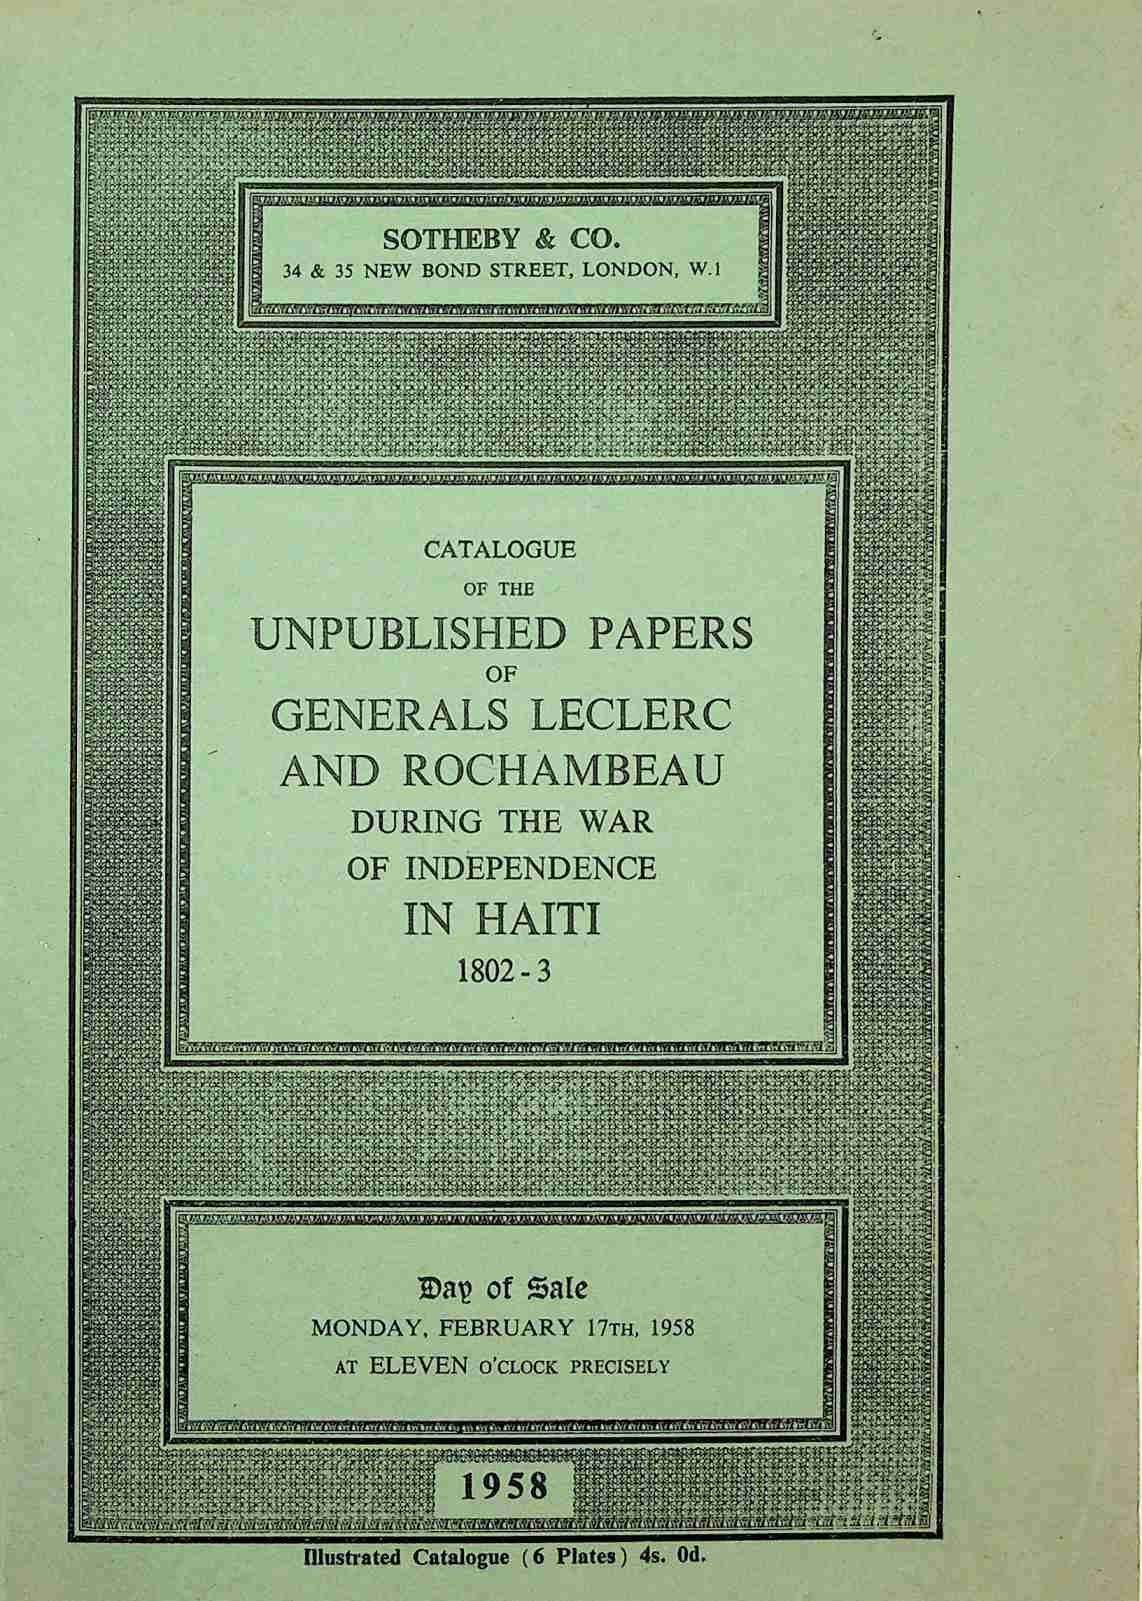 Sothebys 1958 Papers from the War of Independence in Haiti